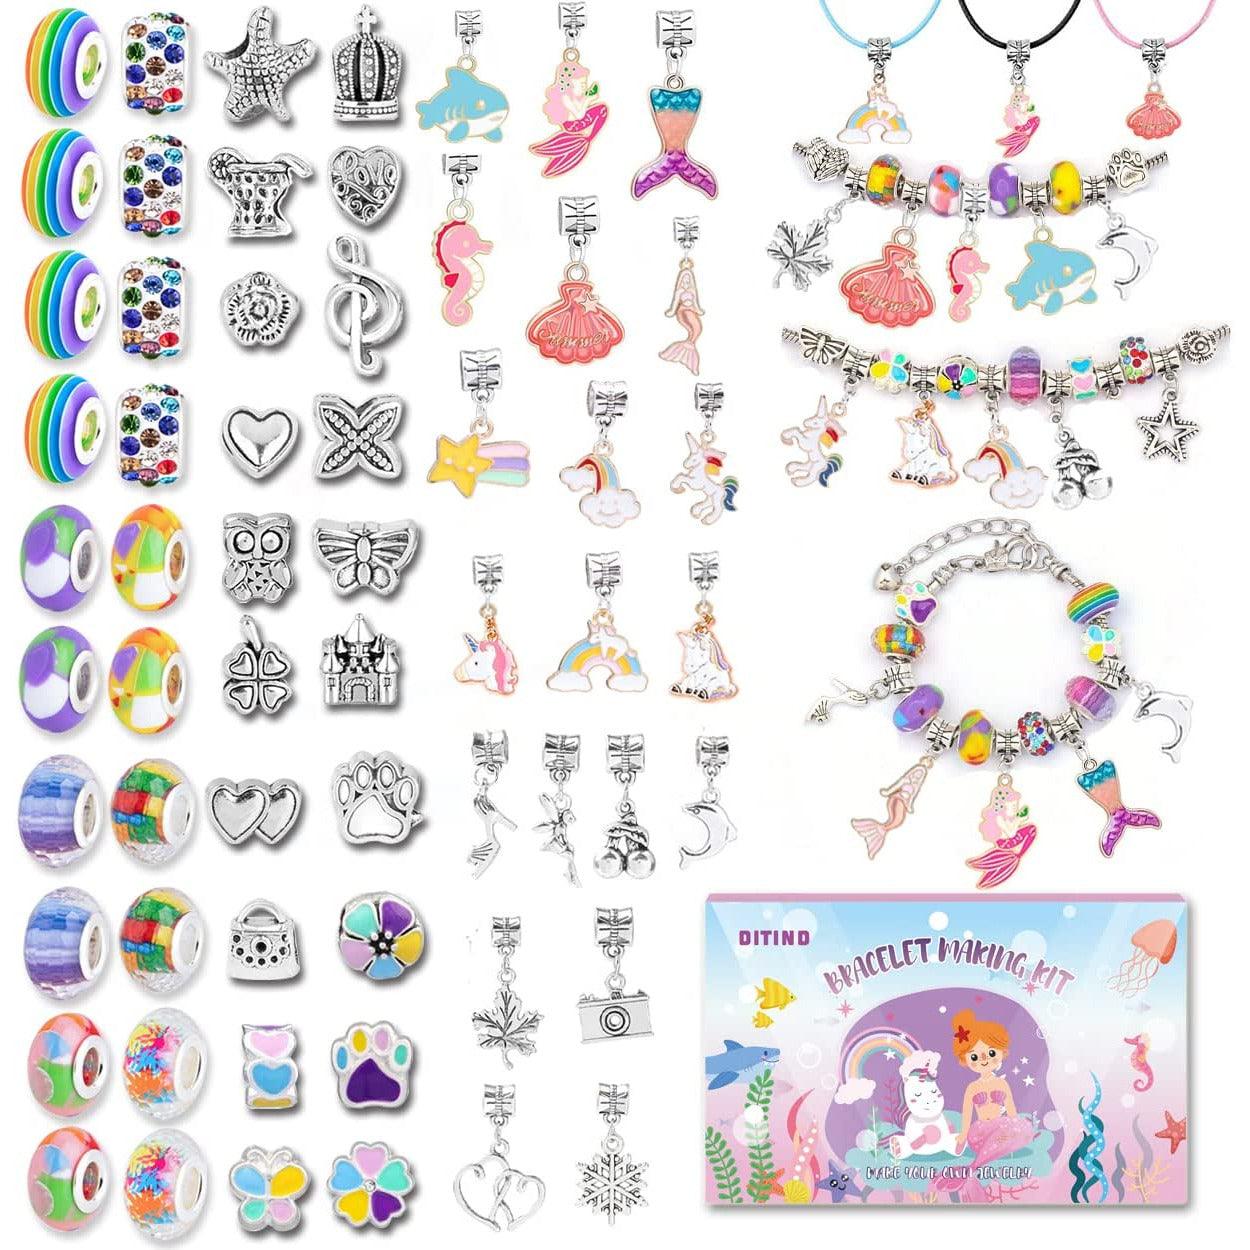 Bracelet Making Kit for Girls - 71 Pieces Jewelry Supplies Beads for  Jewelry Making Bracelets Craft Kit - Christmas Gift Idea for Teen Girls 